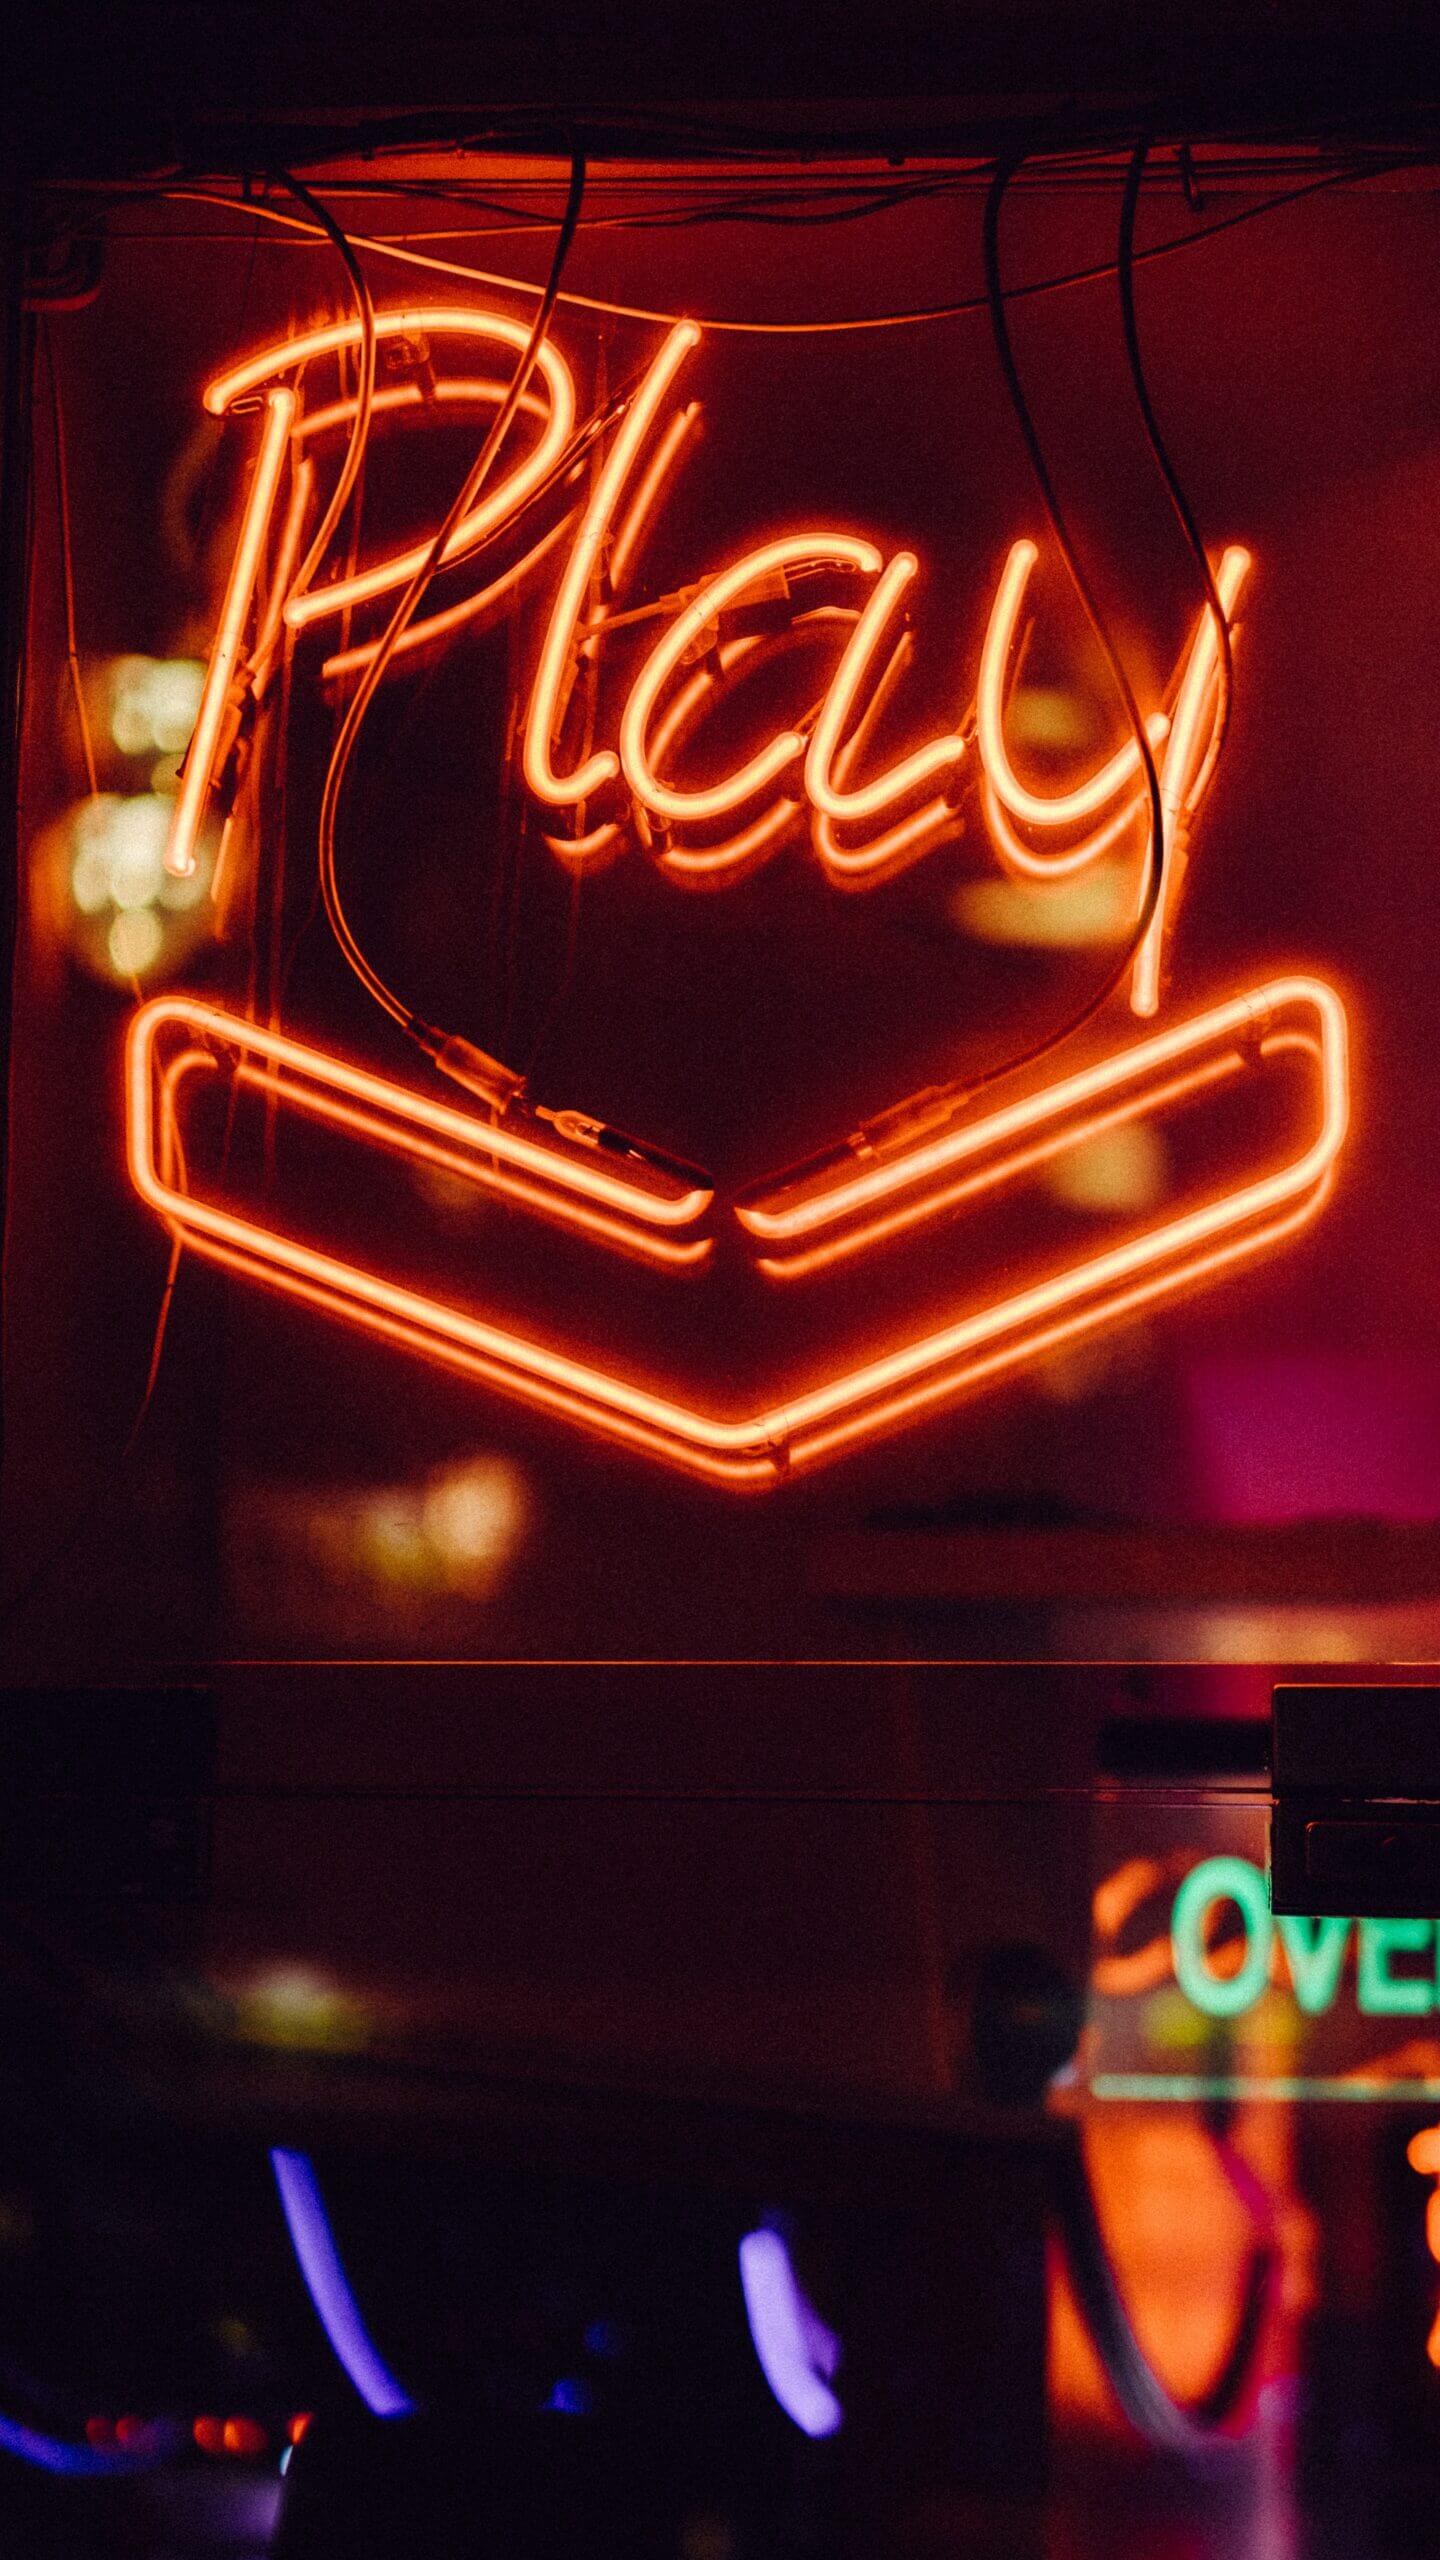 Neon sign lit up with the word Play. Photo by Clem Onojeghuo on Unsplash